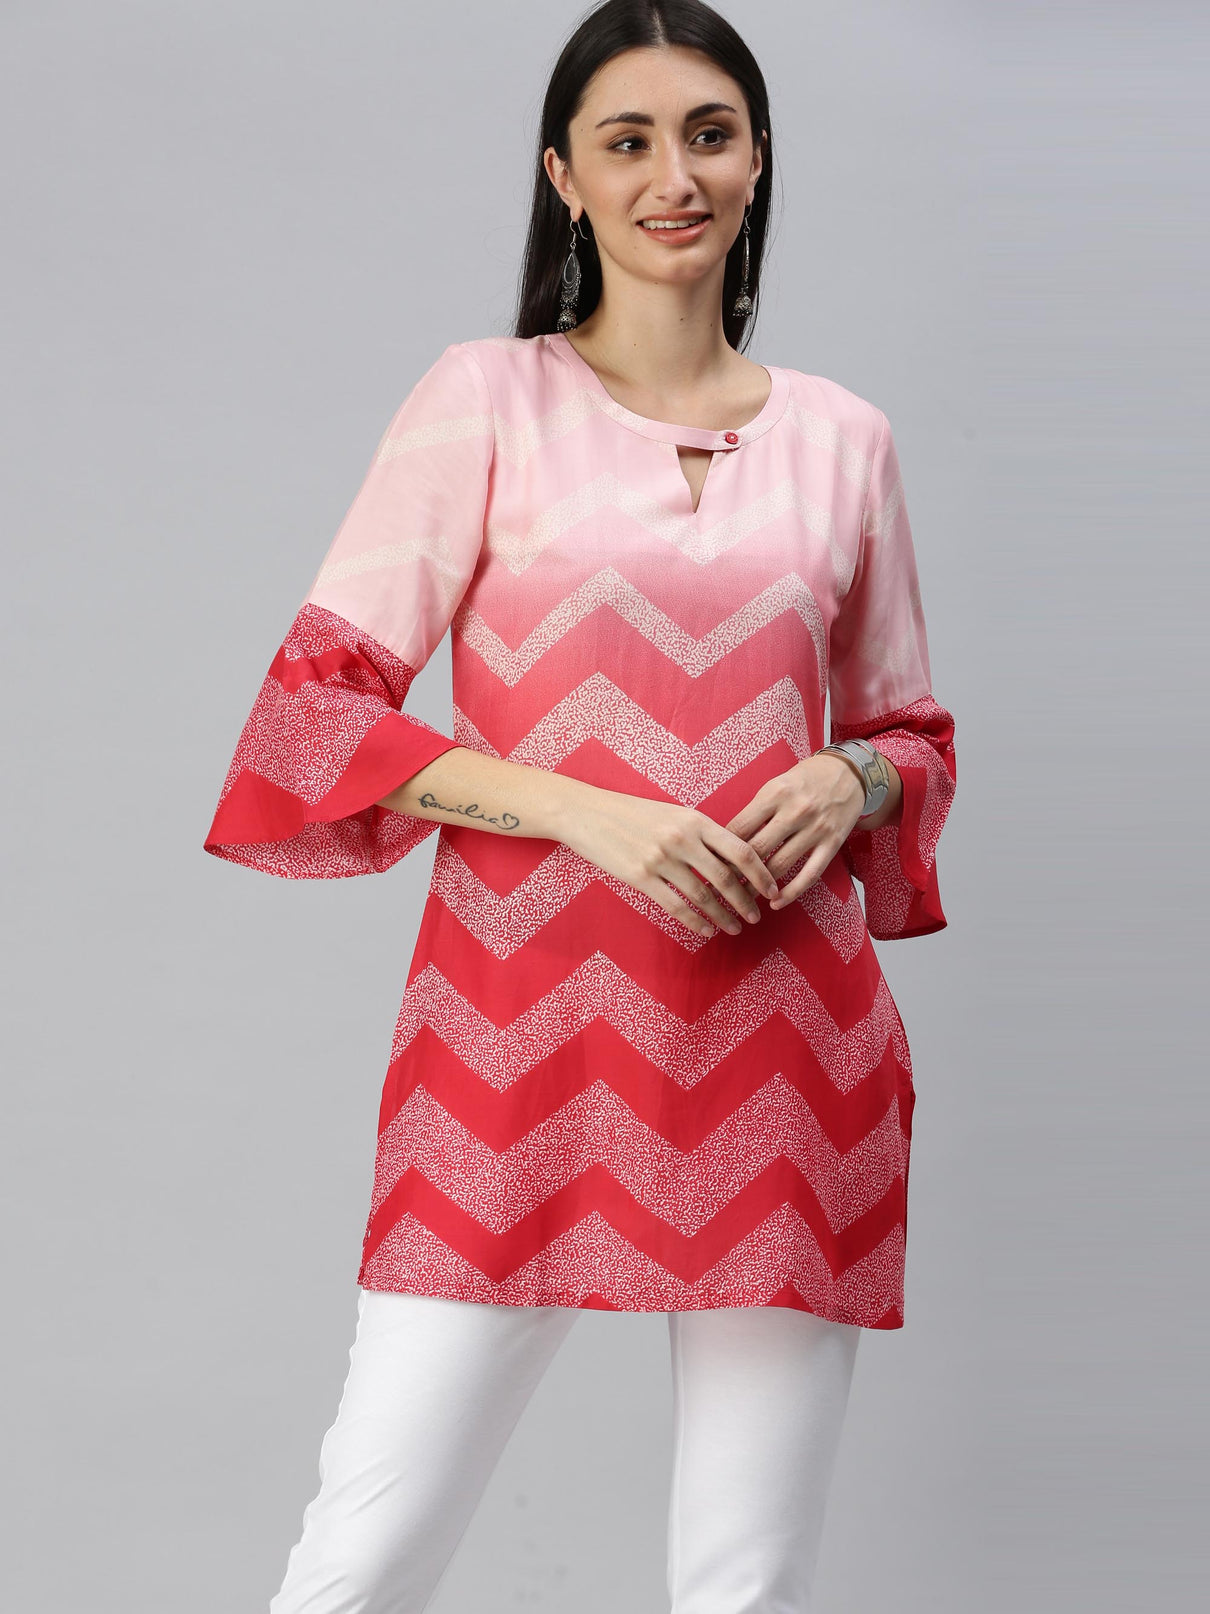 Chevron print top with ombre shade, having ruffled sleeve detail